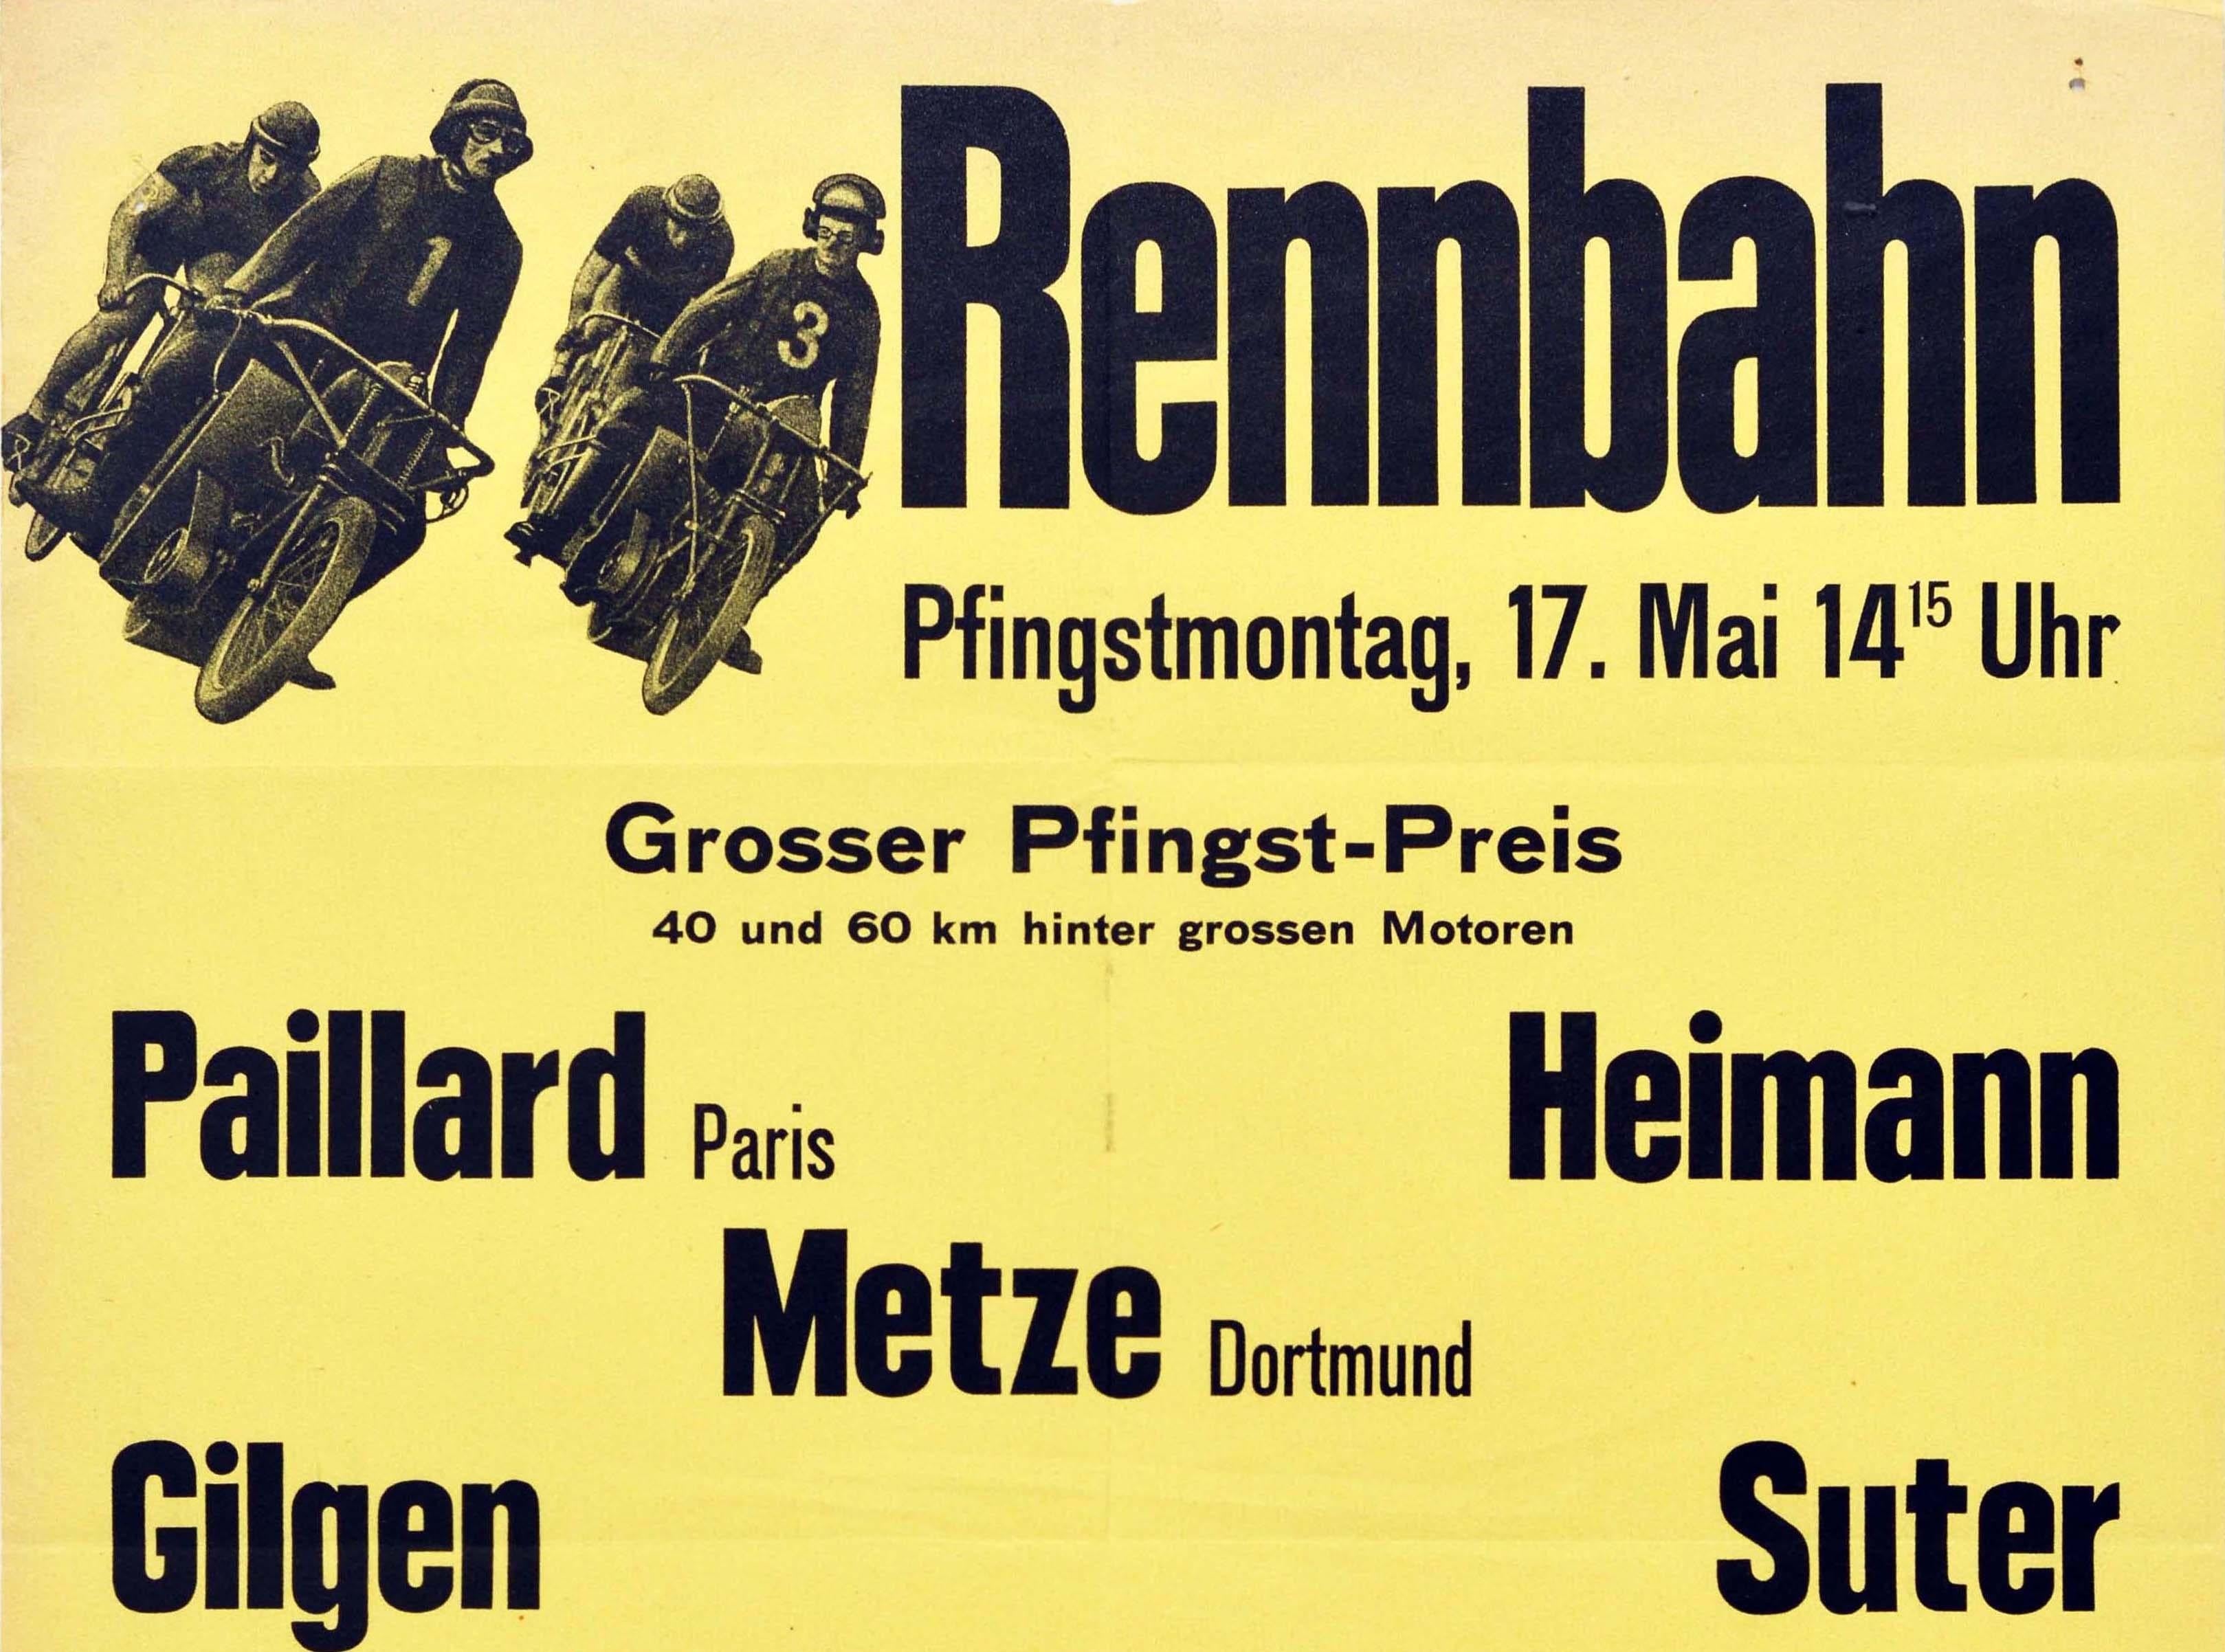 Original vintage motorcycle and bicycle racing poster advertising the Rennbahn race in Oerlikon Zurich on Whit Monday / Pfingstmontag (Pentecost Monday aka Monday of the Holy Spirit is a public holiday in Switzerland) 17 May featuring two motorcycle